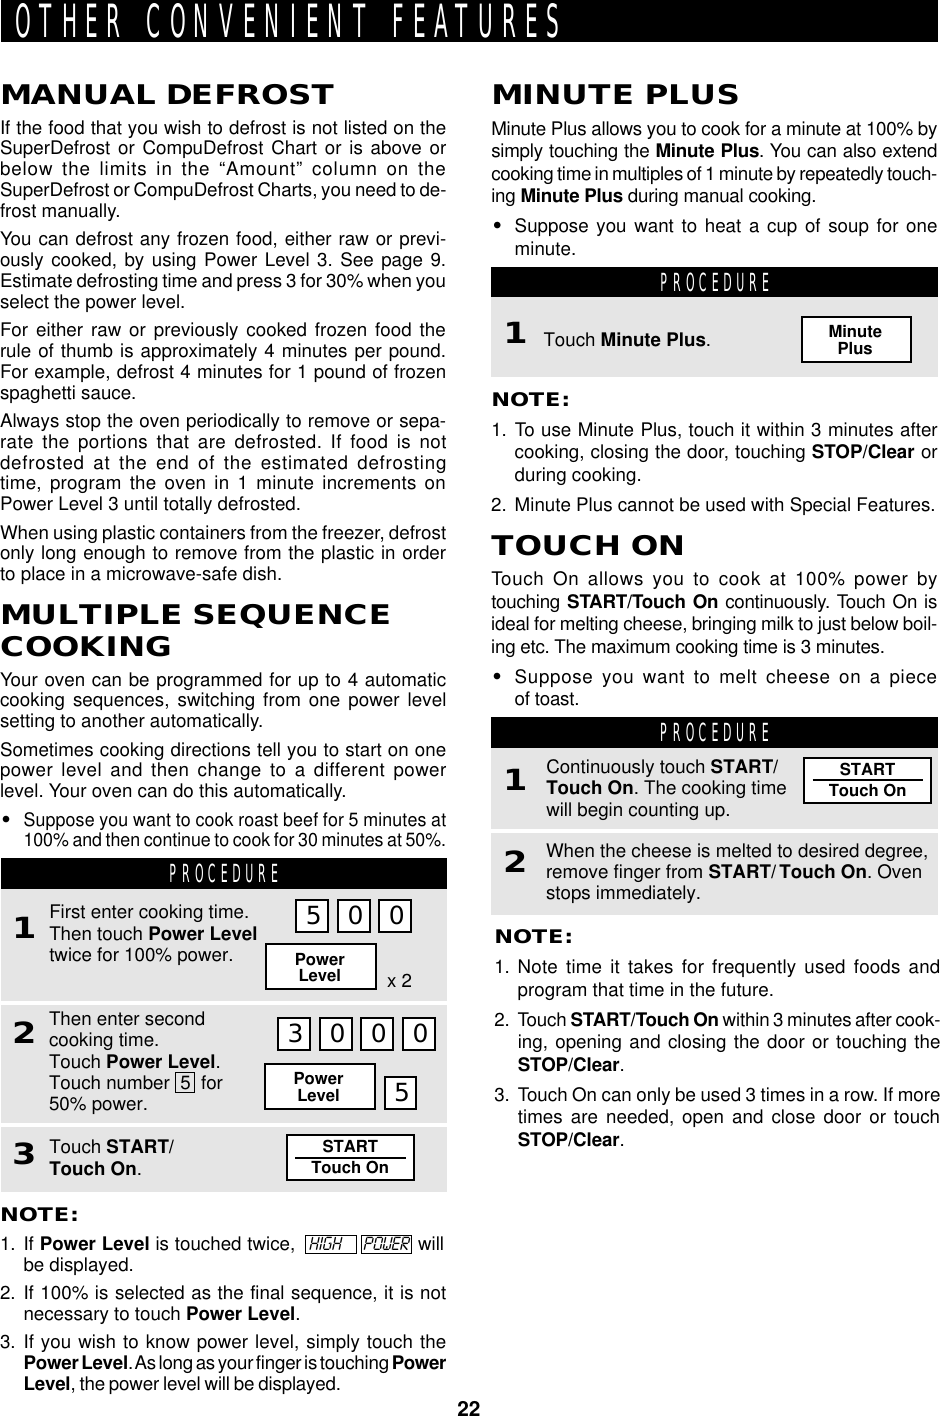 22STARTTouch OnSTARTTouch OnOTHER CONVENIENT FEATURESMANUAL DEFROSTIf the food that you wish to defrost is not listed on theSuperDefrost or CompuDefrost Chart or is above orbelow the limits in the “Amount” column on theSuperDefrost or CompuDefrost Charts, you need to de-frost manually.You can defrost any frozen food, either raw or previ-ously cooked, by using Power Level 3. See page 9.Estimate defrosting time and press 3 for 30% when youselect the power level.For either raw or previously cooked frozen food therule of thumb is approximately 4 minutes per pound.For example, defrost 4 minutes for 1 pound of frozenspaghetti sauce.Always stop the oven periodically to remove or sepa-rate the portions that are defrosted. If food is notdefrosted at the end of the estimated defrostingtime, program the oven in 1 minute increments onPower Level 3 until totally defrosted.When using plastic containers from the freezer, defrostonly long enough to remove from the plastic in orderto place in a microwave-safe dish.MULTIPLE SEQUENCECOOKINGYour oven can be programmed for up to 4 automaticcooking sequences, switching from one power levelsetting to another automatically.Sometimes cooking directions tell you to start on onepower level and then change to a different powerlevel. Your oven can do this automatically.•Suppose you want to cook roast beef for 5 minutes at100% and then continue to cook for 30 minutes at 50%.NOTE:1. Note time it takes for frequently used foods andprogram that time in the future.2. Touch START/Touch On within 3 minutes after cook-ing, opening and closing the door or touching theSTOP/Clear.3. Touch On can only be used 3 times in a row. If moretimes are needed, open and close door or touchSTOP/Clear.PROCEDURE1When the cheese is melted to desired degree,remove finger from START/ Touch On. Ovenstops immediately.2Continuously touch START/Touch On. The cooking timewill begin counting up.MINUTE PLUSMinute Plus allows you to cook for a minute at 100% bysimply touching the Minute Plus. You can also extendcooking time in multiples of 1 minute by repeatedly touch-ing Minute Plus during manual cooking.•Suppose you want to heat a cup of soup for oneminute.PROCEDURETouch Minute Plus.MinutePlusNOTE:1. To use Minute Plus, touch it within 3 minutes aftercooking, closing the door, touching STOP/Clear orduring cooking.2. Minute Plus cannot be used with Special Features.TOUCH ONTouch On allows you to cook at 100% power bytouching START/Touch On continuously. Touch On isideal for melting cheese, bringing milk to just below boil-ing etc. The maximum cooking time is 3 minutes.•Suppose you want to melt cheese on a pieceof toast.1PROCEDURE1Then enter secondcooking time.Touch Power Level.Touch number  5  for50% power.2First enter cooking time.Then touch Power Leveltwice for 100% power.5 0 0PowerLevel x 23 0 0 0PowerLevel 5Touch START/Touch On.3NOTE:1. If Power Level is touched twice,   HIGH      POWER  willbe displayed.2. If 100% is selected as the final sequence, it is notnecessary to touch Power Level.3. If you wish to know power level, simply touch thePower Level. As long as your finger is touching PowerLevel, the power level will be displayed.